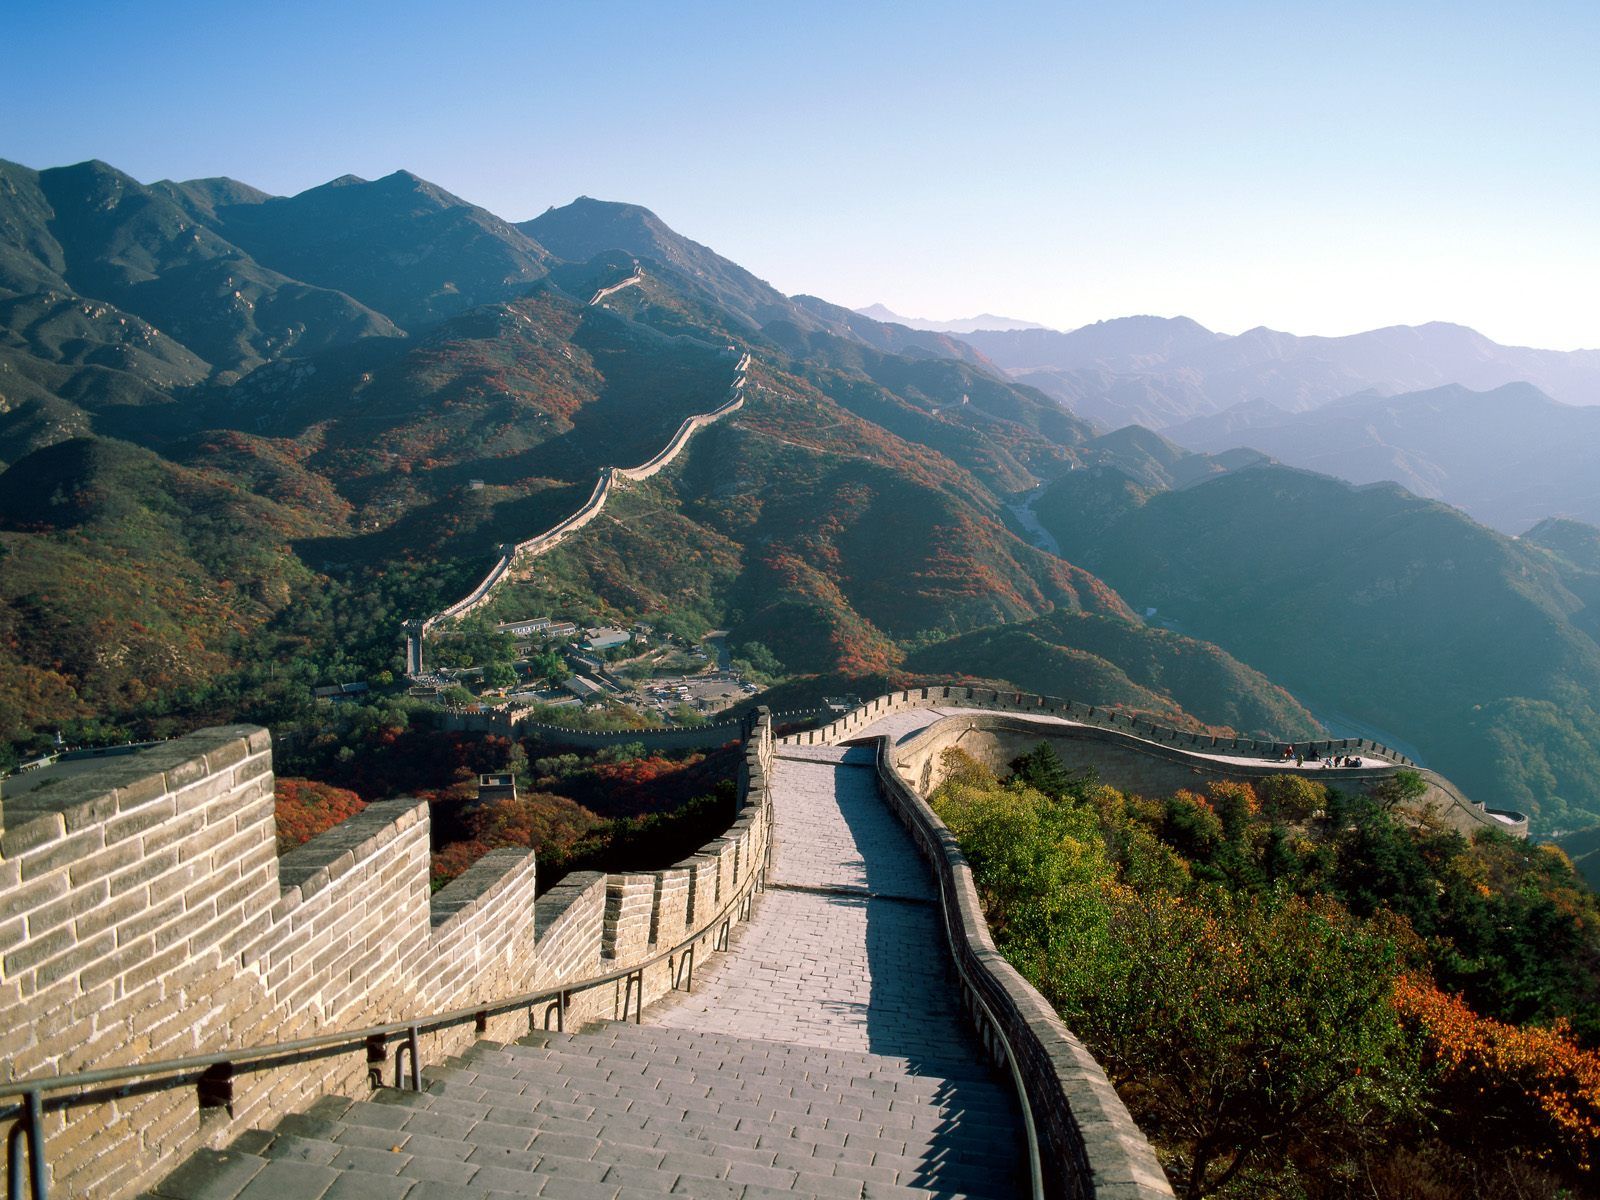 Wonders of World Wallpaper Android Apps on Google Play 1600×1200 Wonders Of The World Wallpaper 49. Wonders of the world, Great wall of china, Earth picture